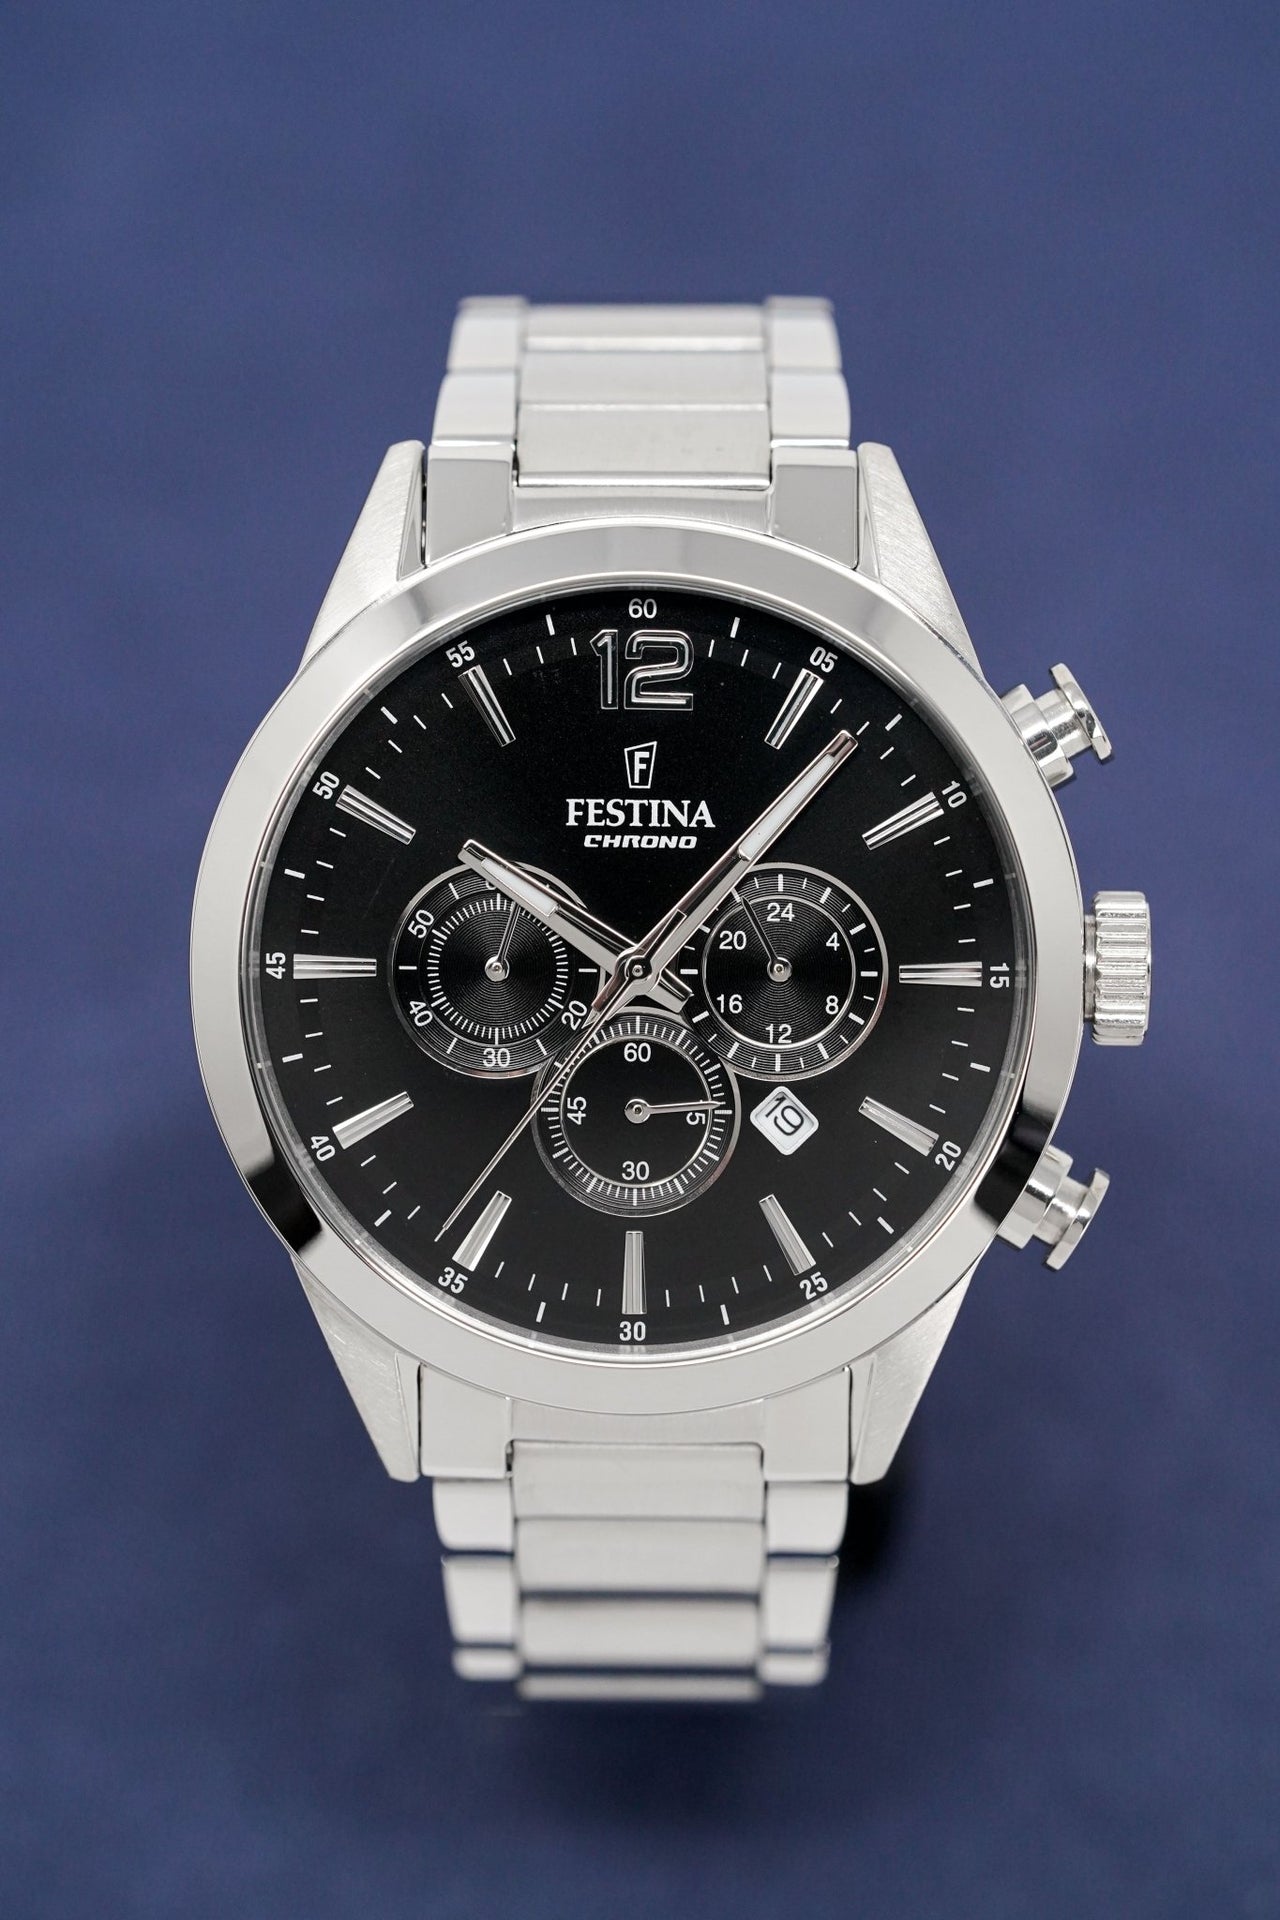 Watch & – Watches Crystals Chrono Steel Stainless Timeless F20343-8 Festina Black